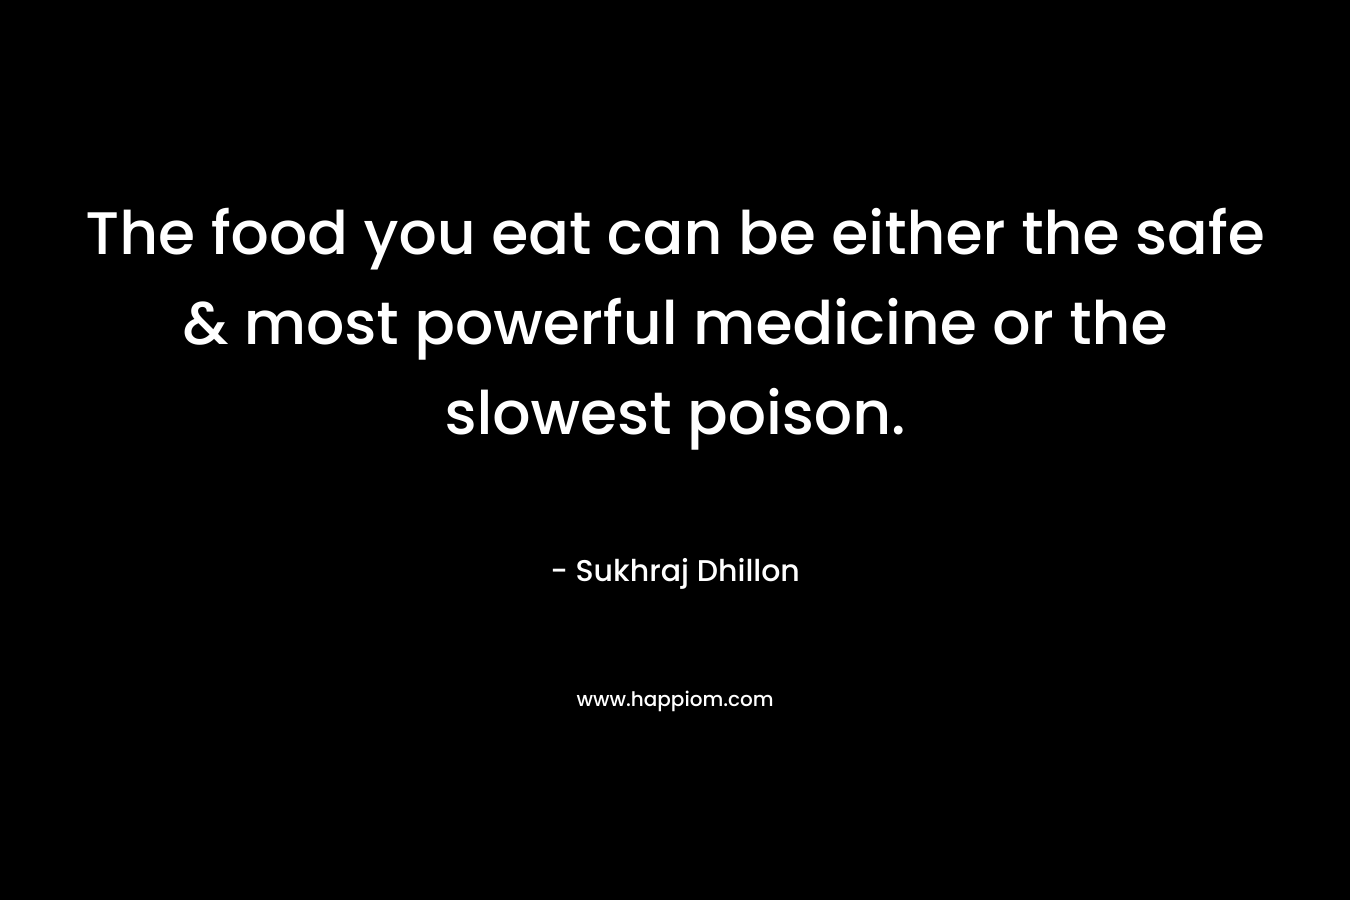 The food you eat can be either the safe & most powerful medicine or the slowest poison.